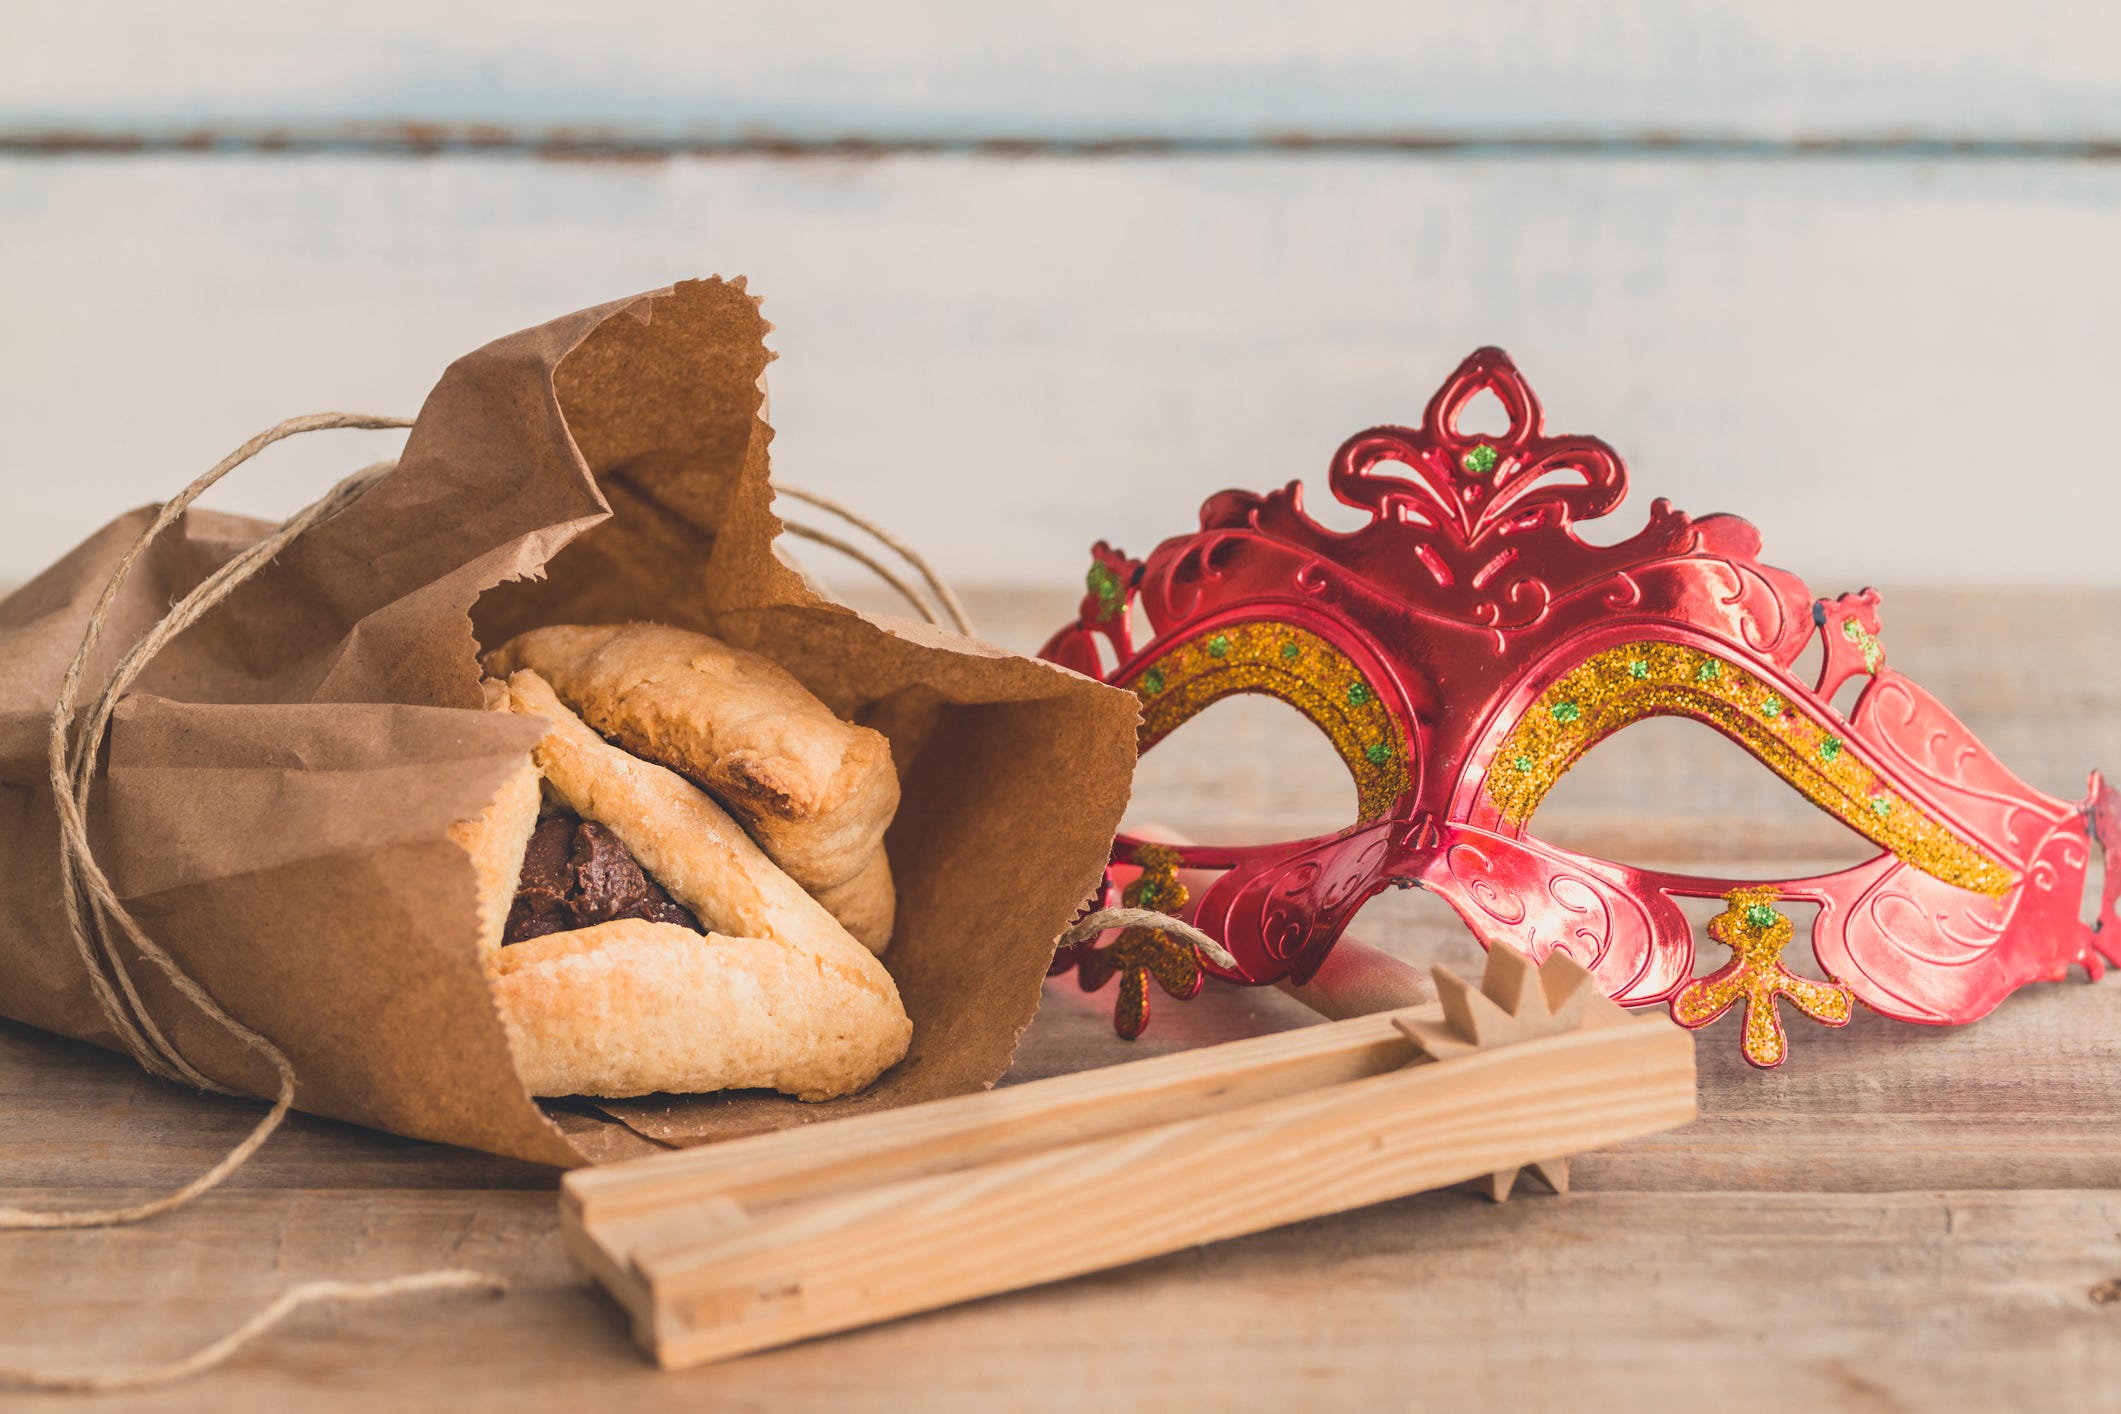 Get to Know the Importance of the Jewish Holiday Purim